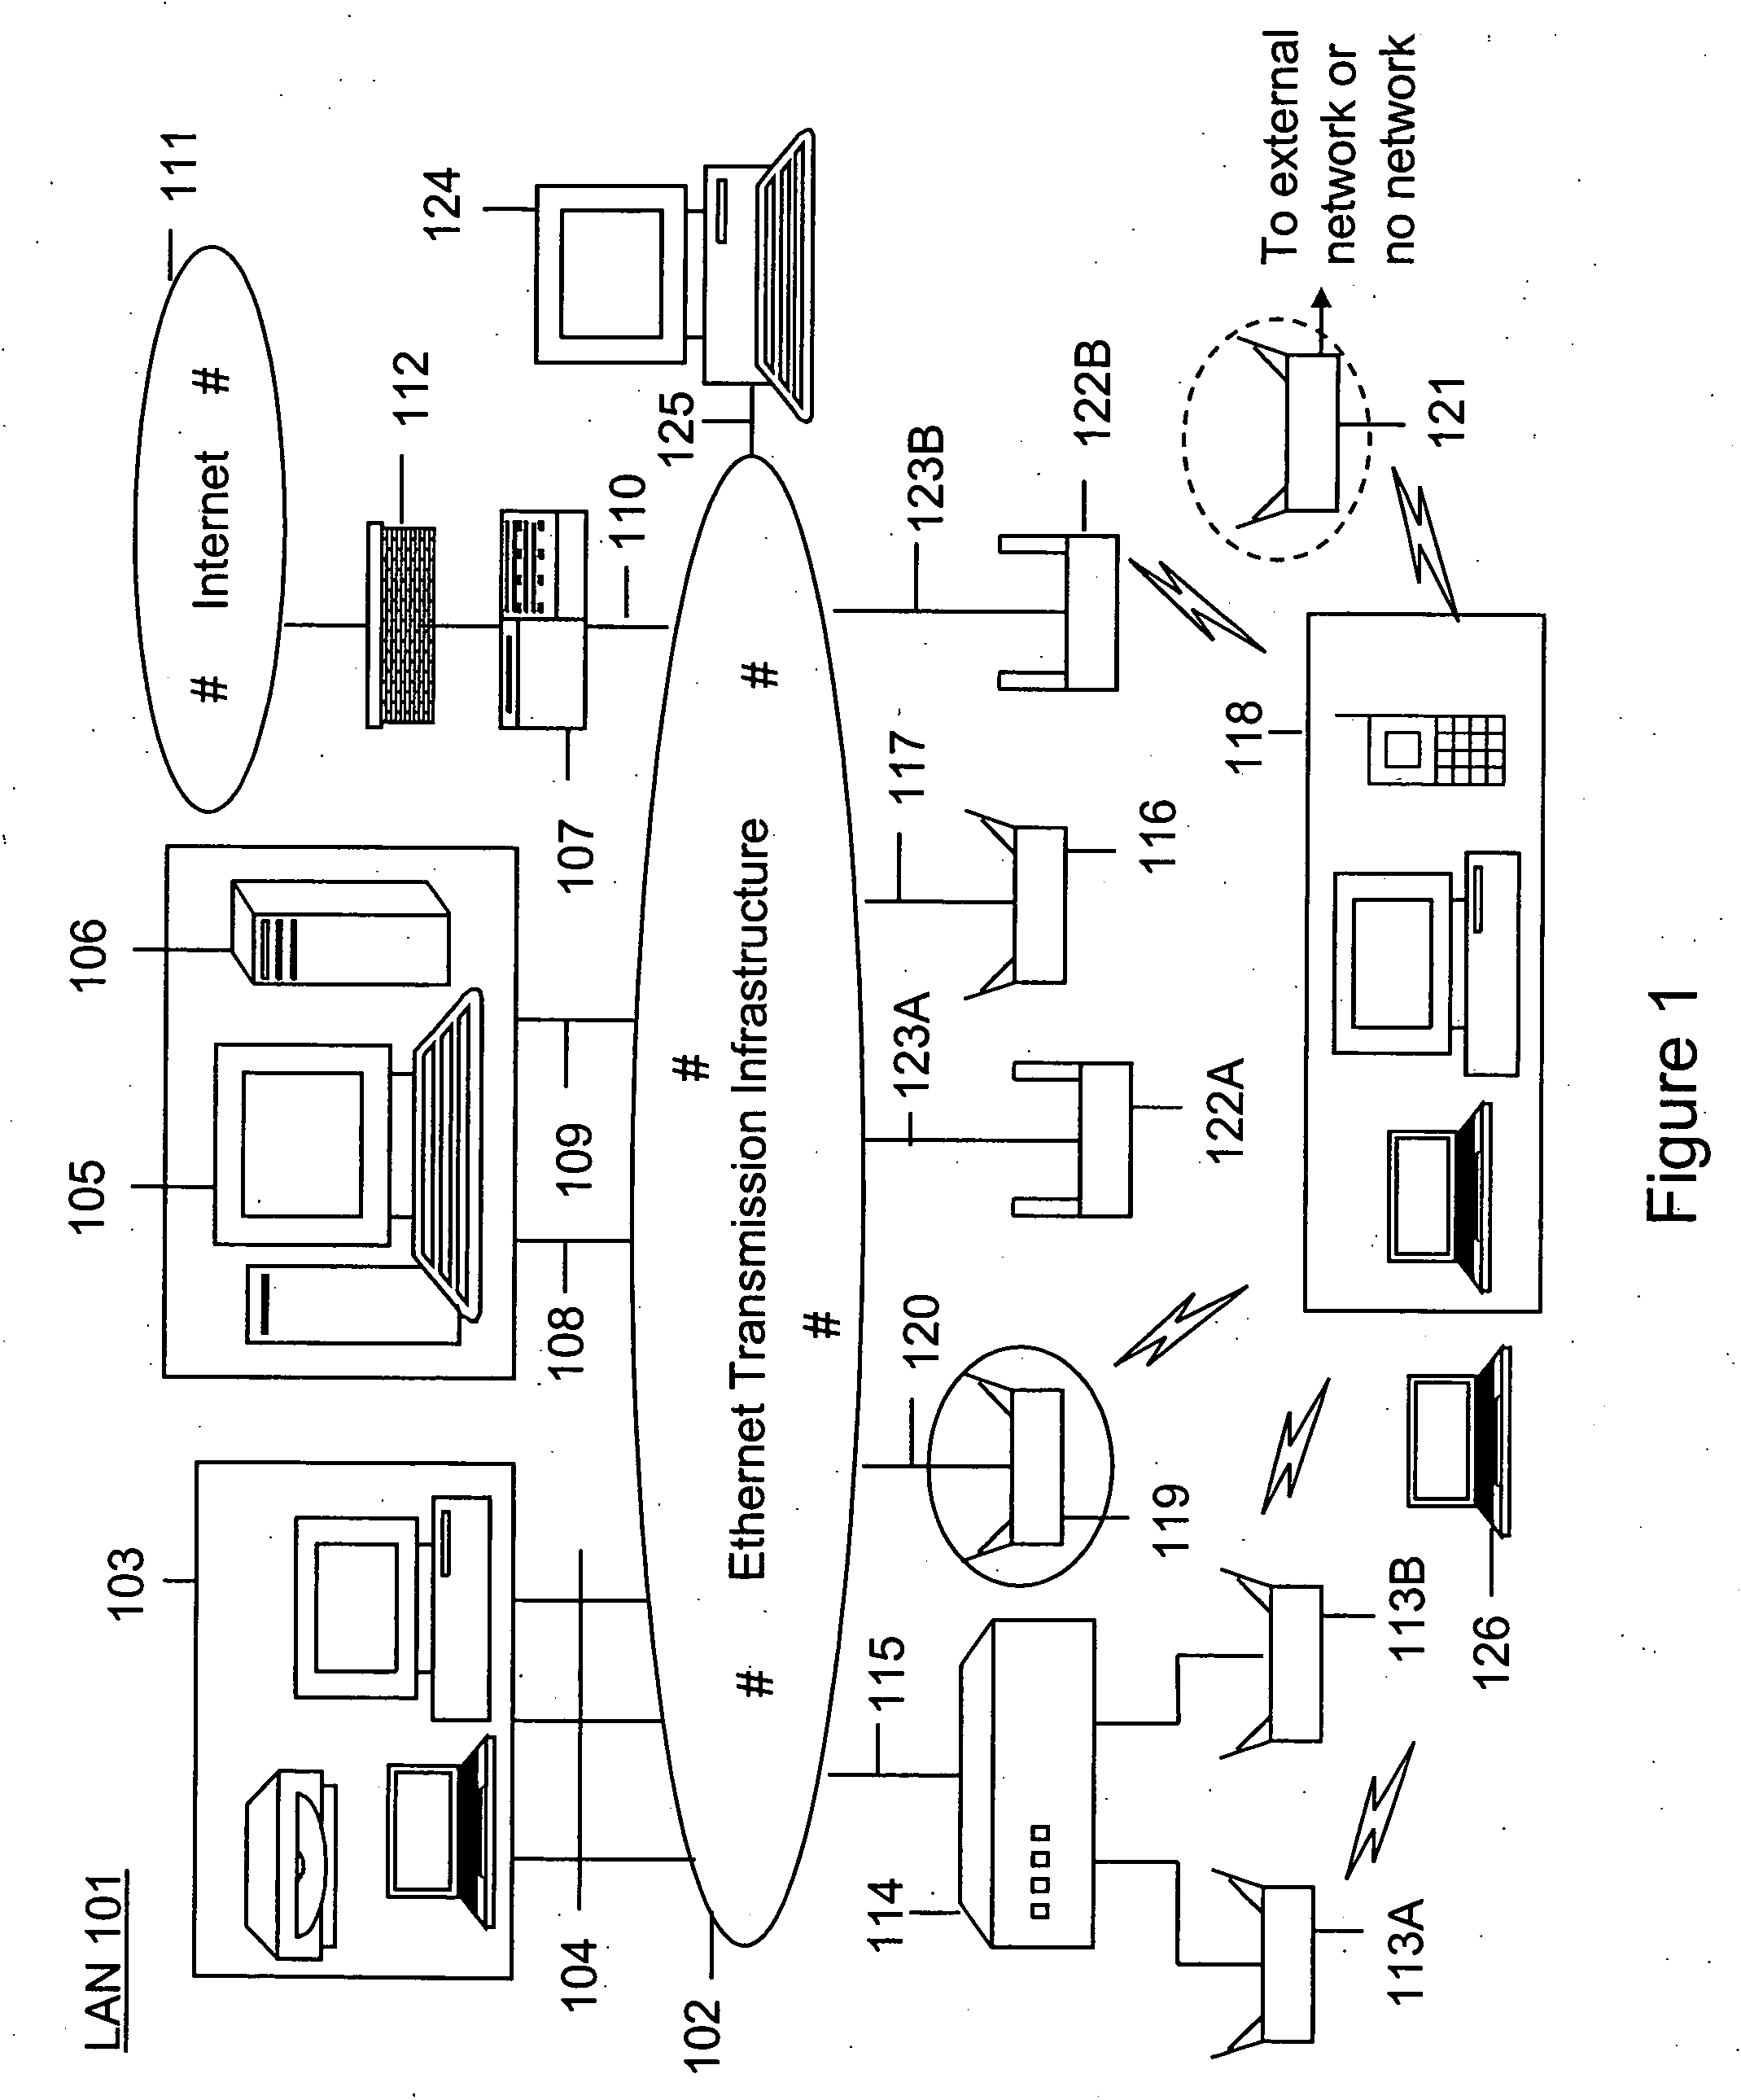 Method for wireless network security exposure visualization and scenario analysis